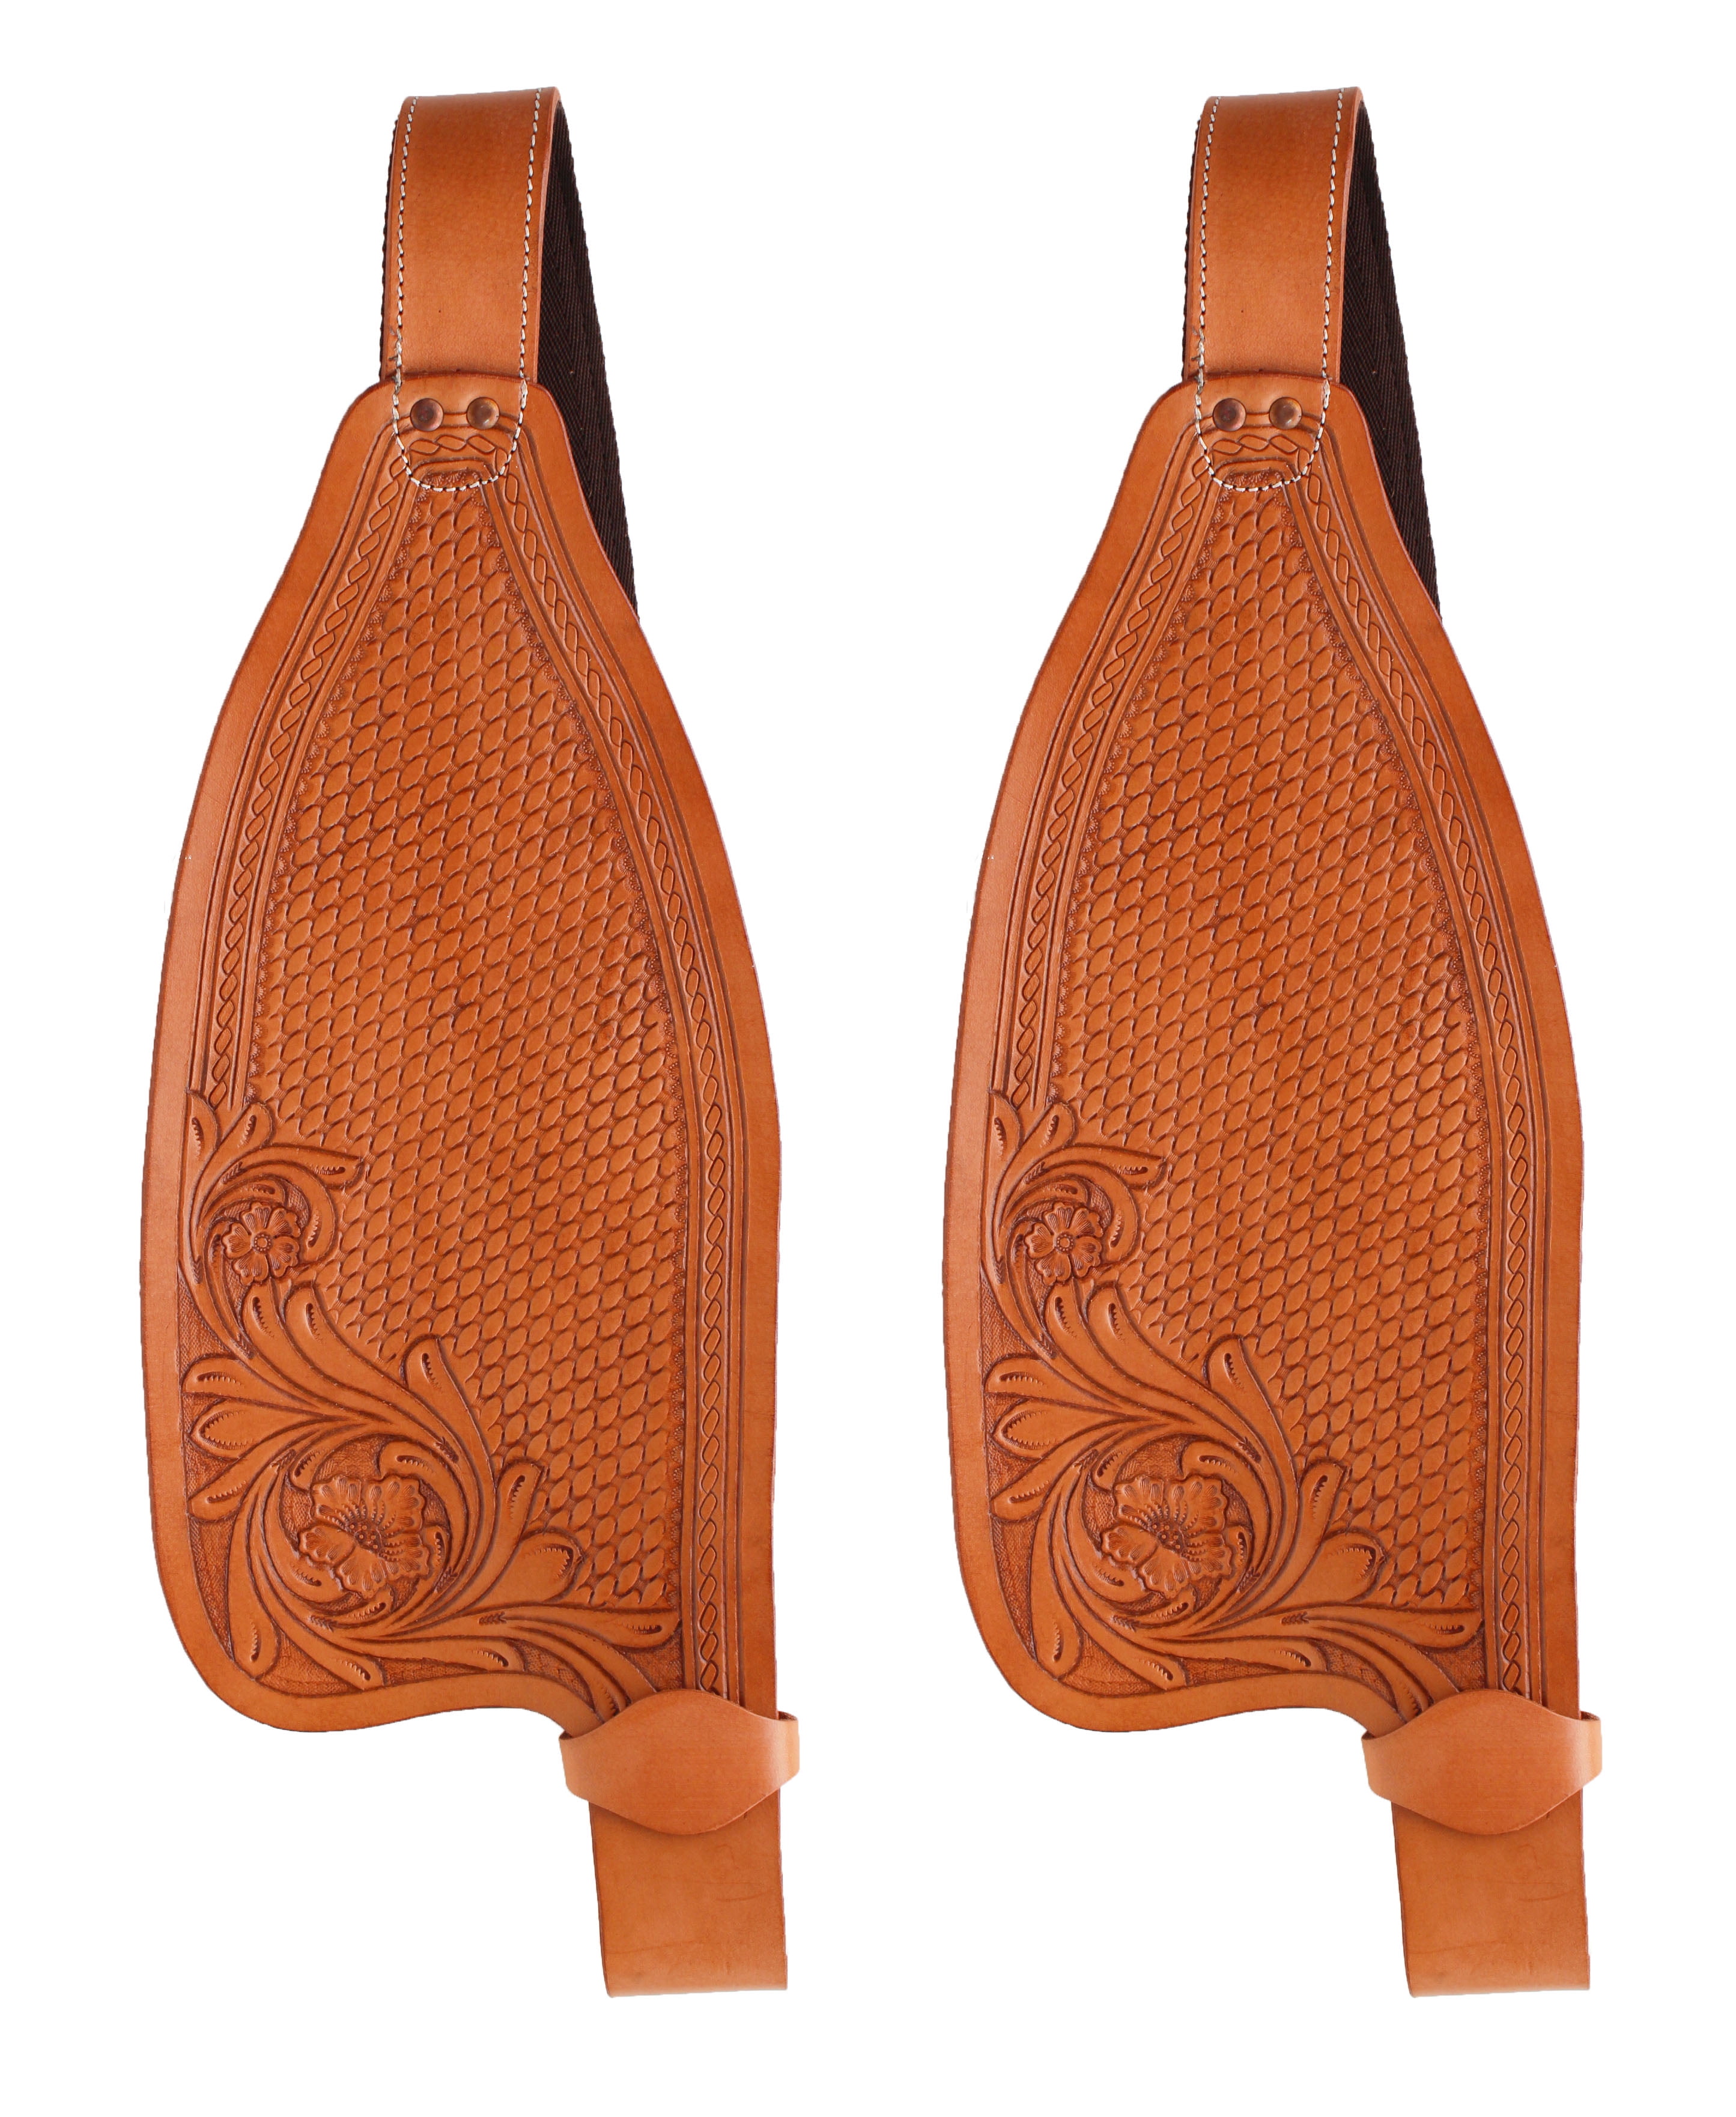 HAND TOOLED BASKET WEAVE WESTERN SADDLE FENDERS REPLACEMENT PAIR HORSE TRAIL SET 